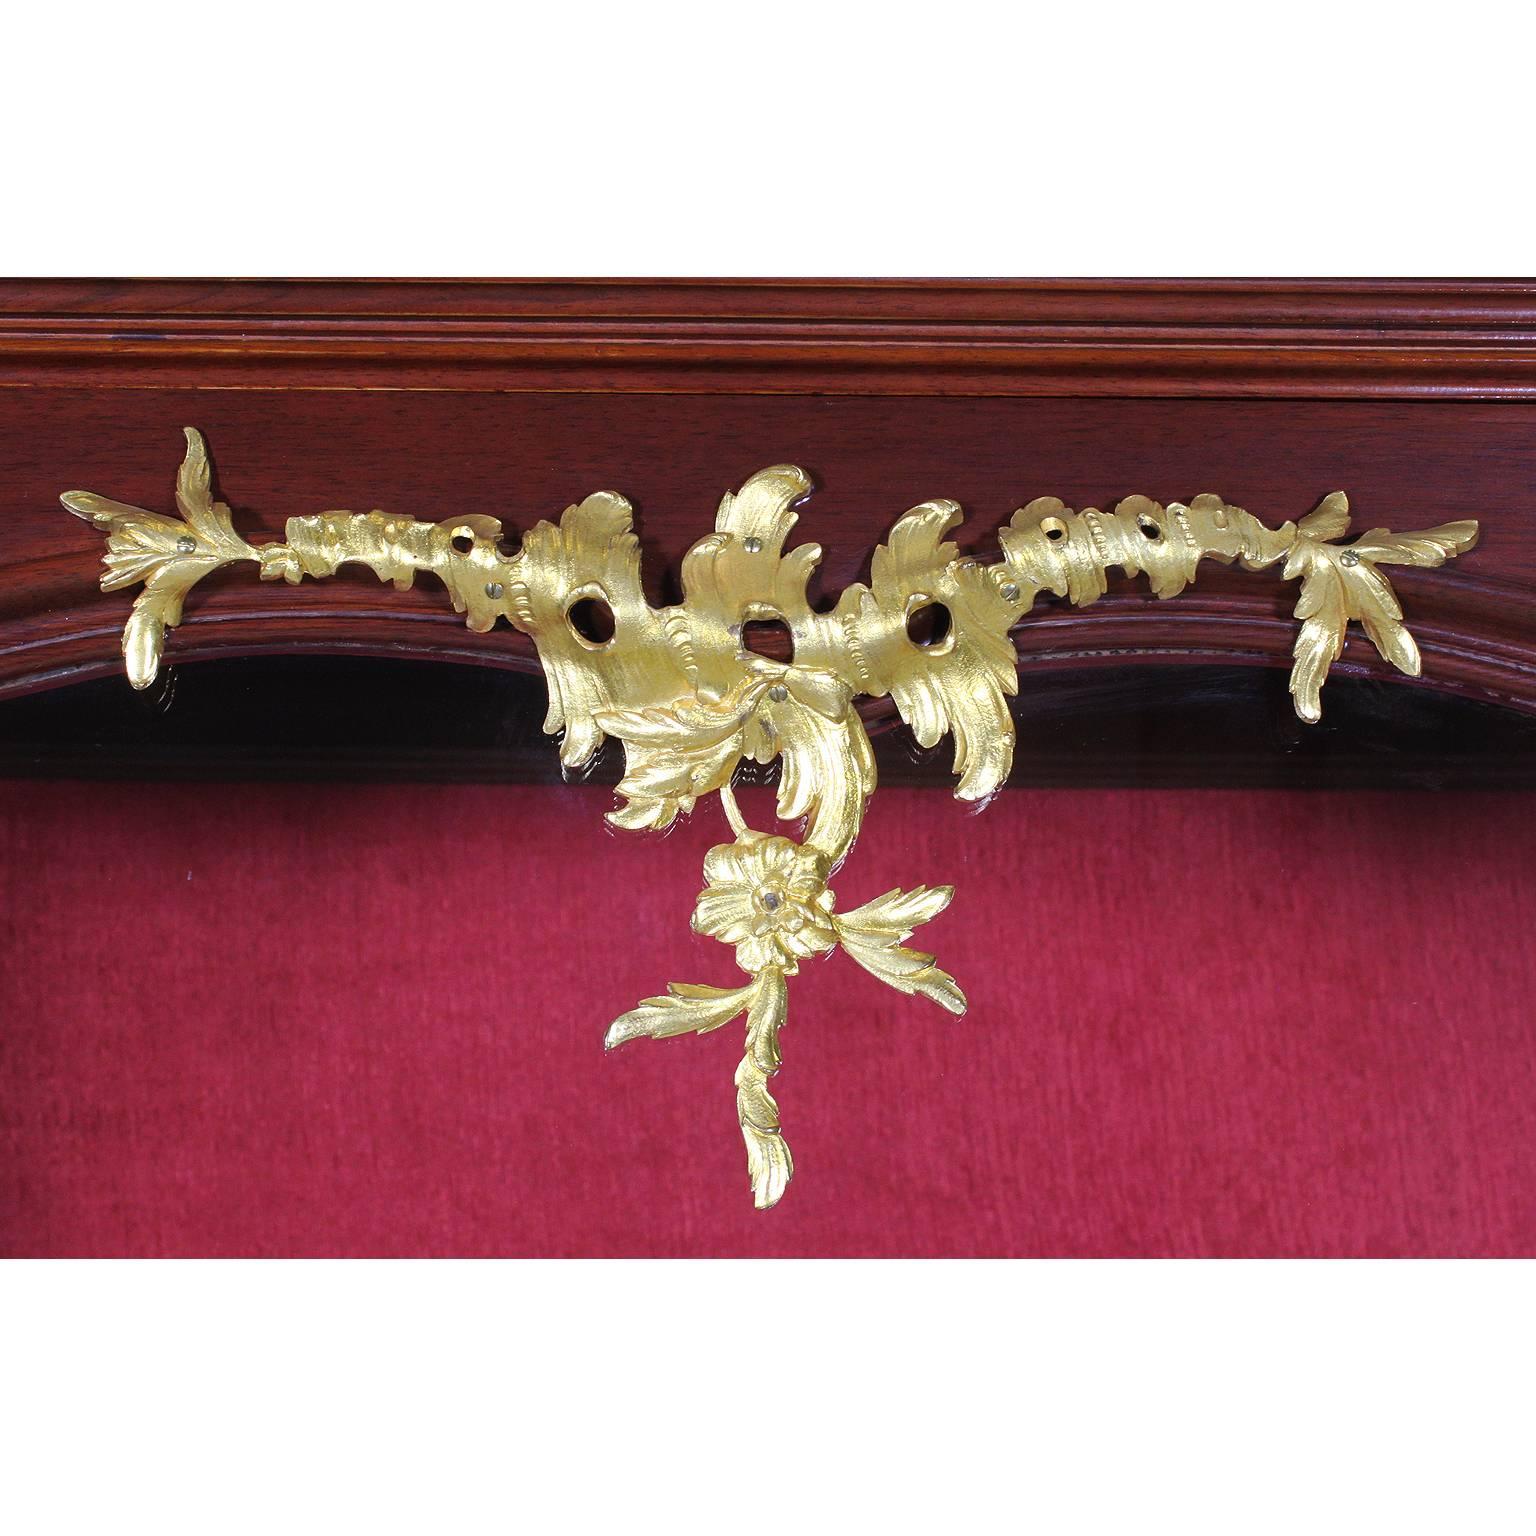 Carved French, 19th-20th Century Louis XV Style Gilt Bronze-Mounted Vitrine by Haentges For Sale